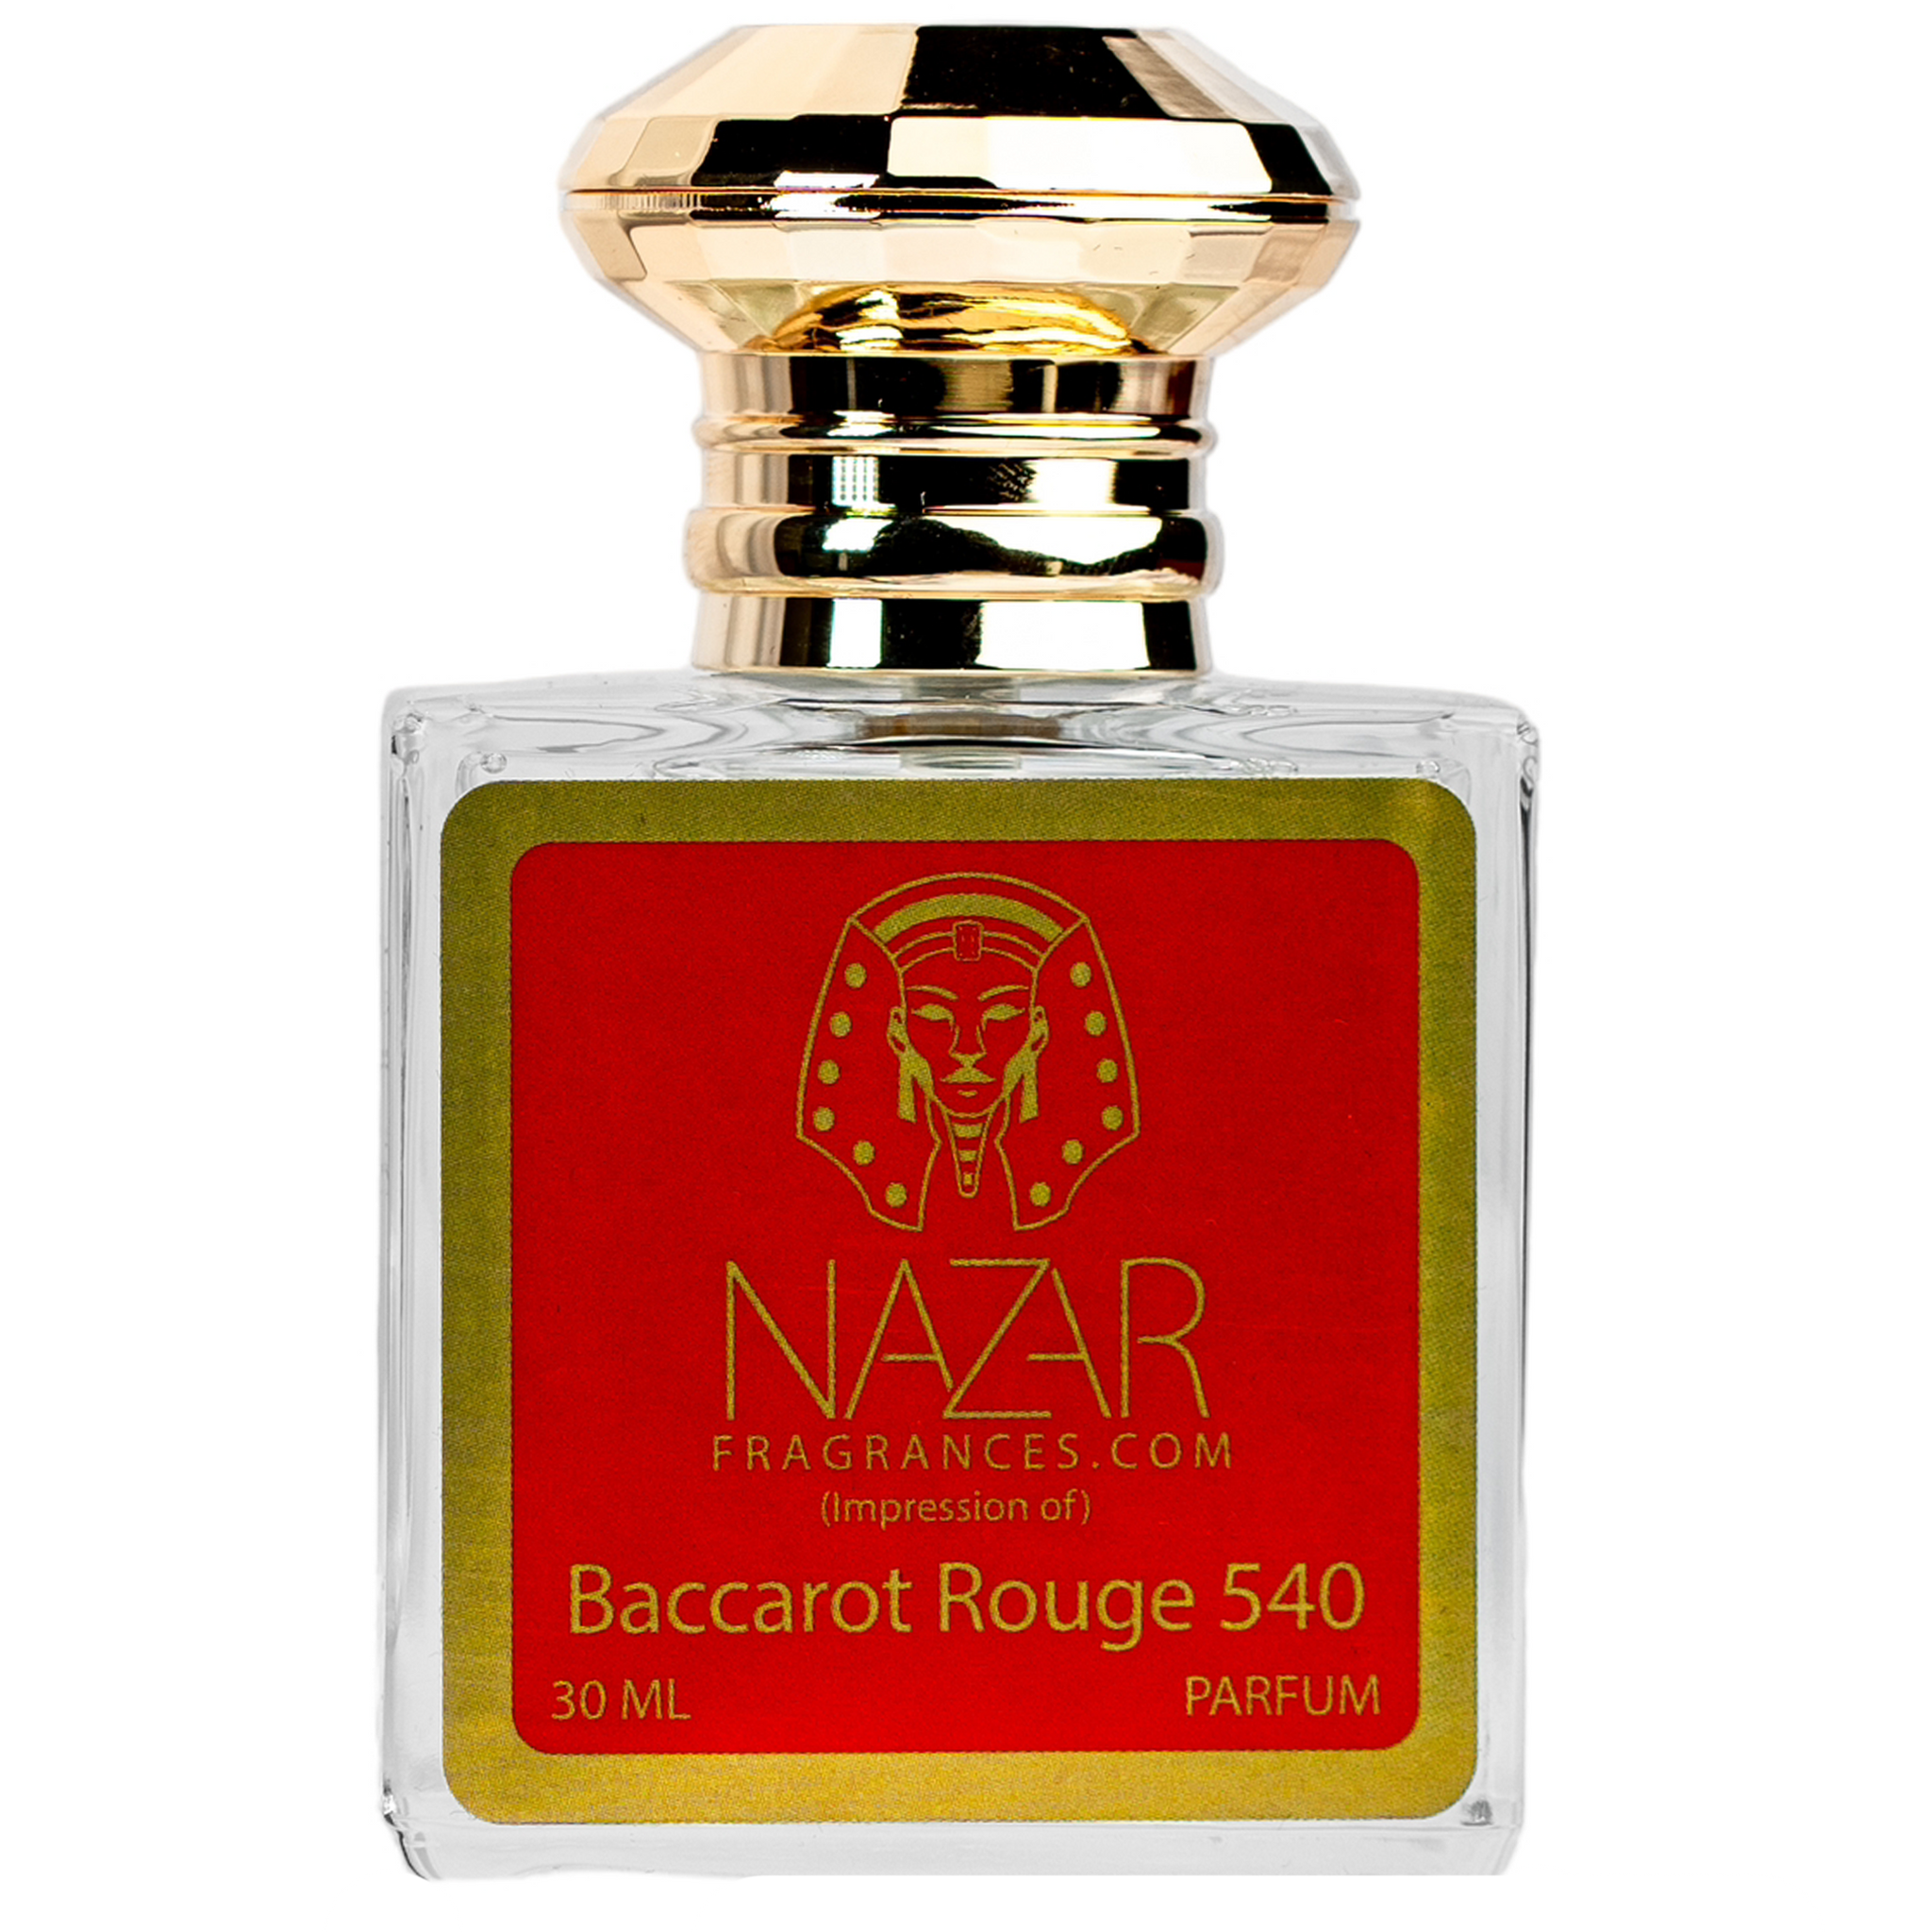 *Baccarat Rouge 540